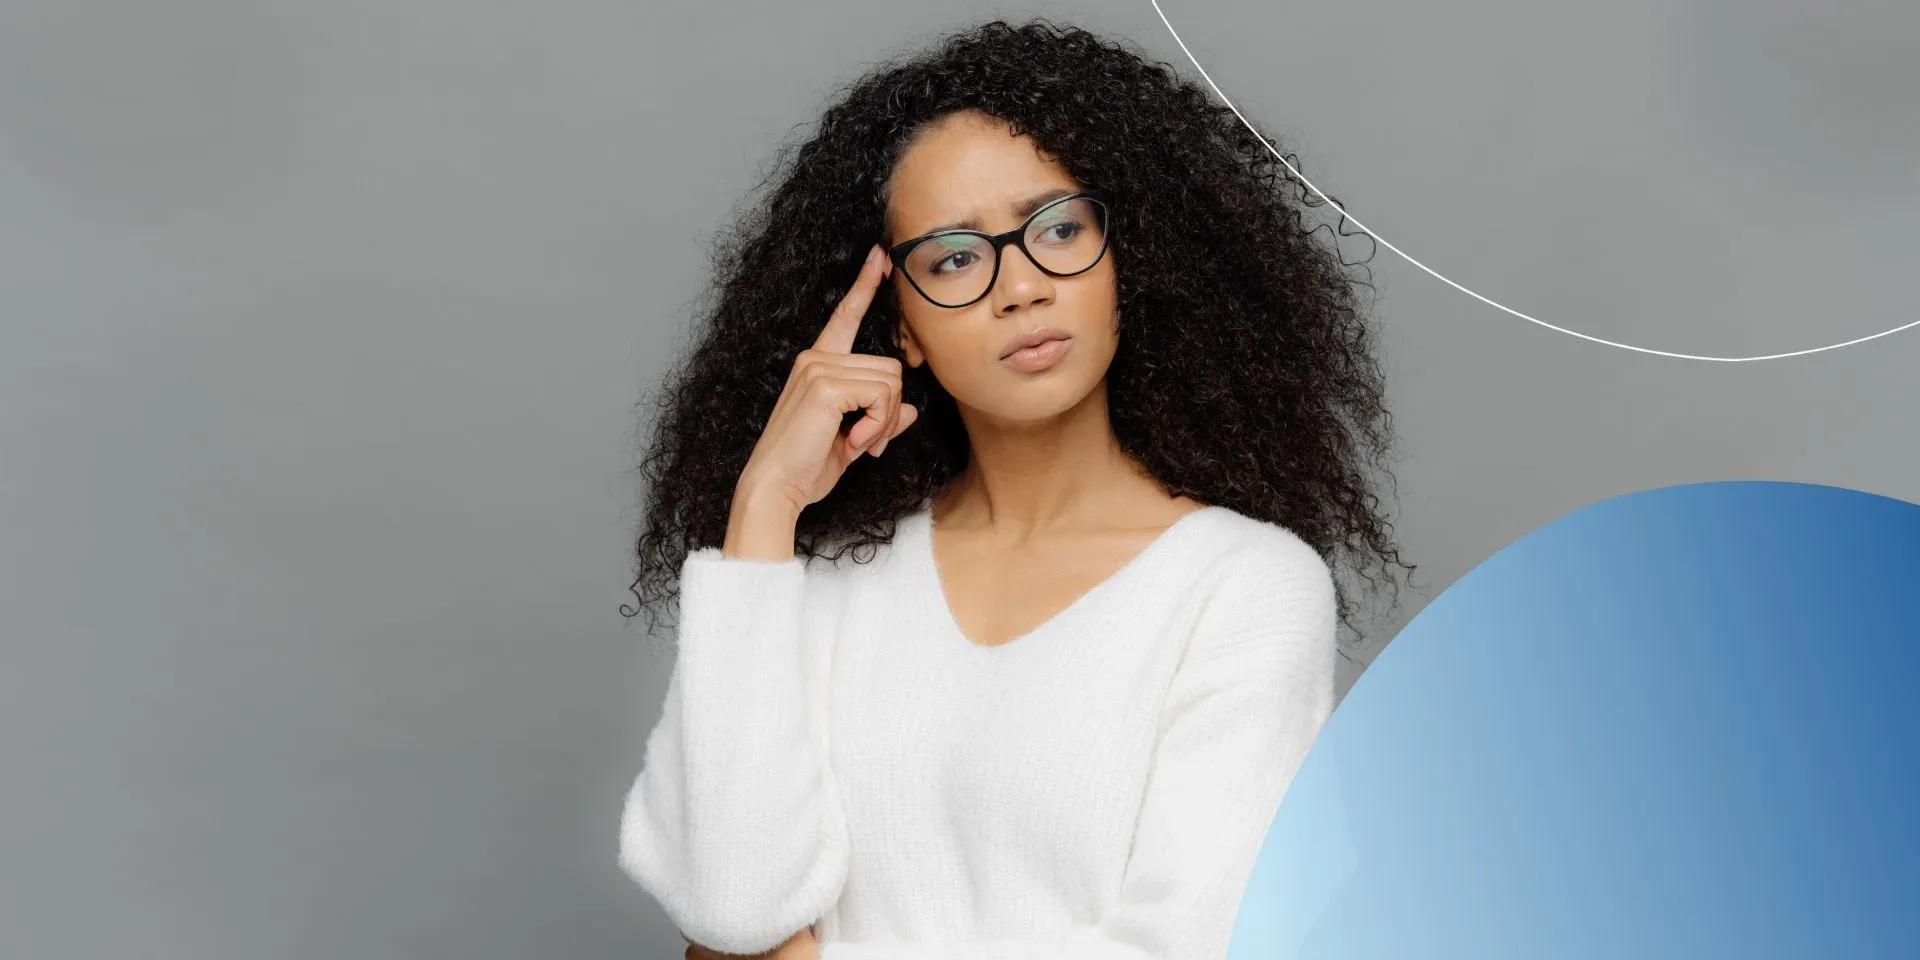 Woman wearing white shirt and glasses with thinking pose 